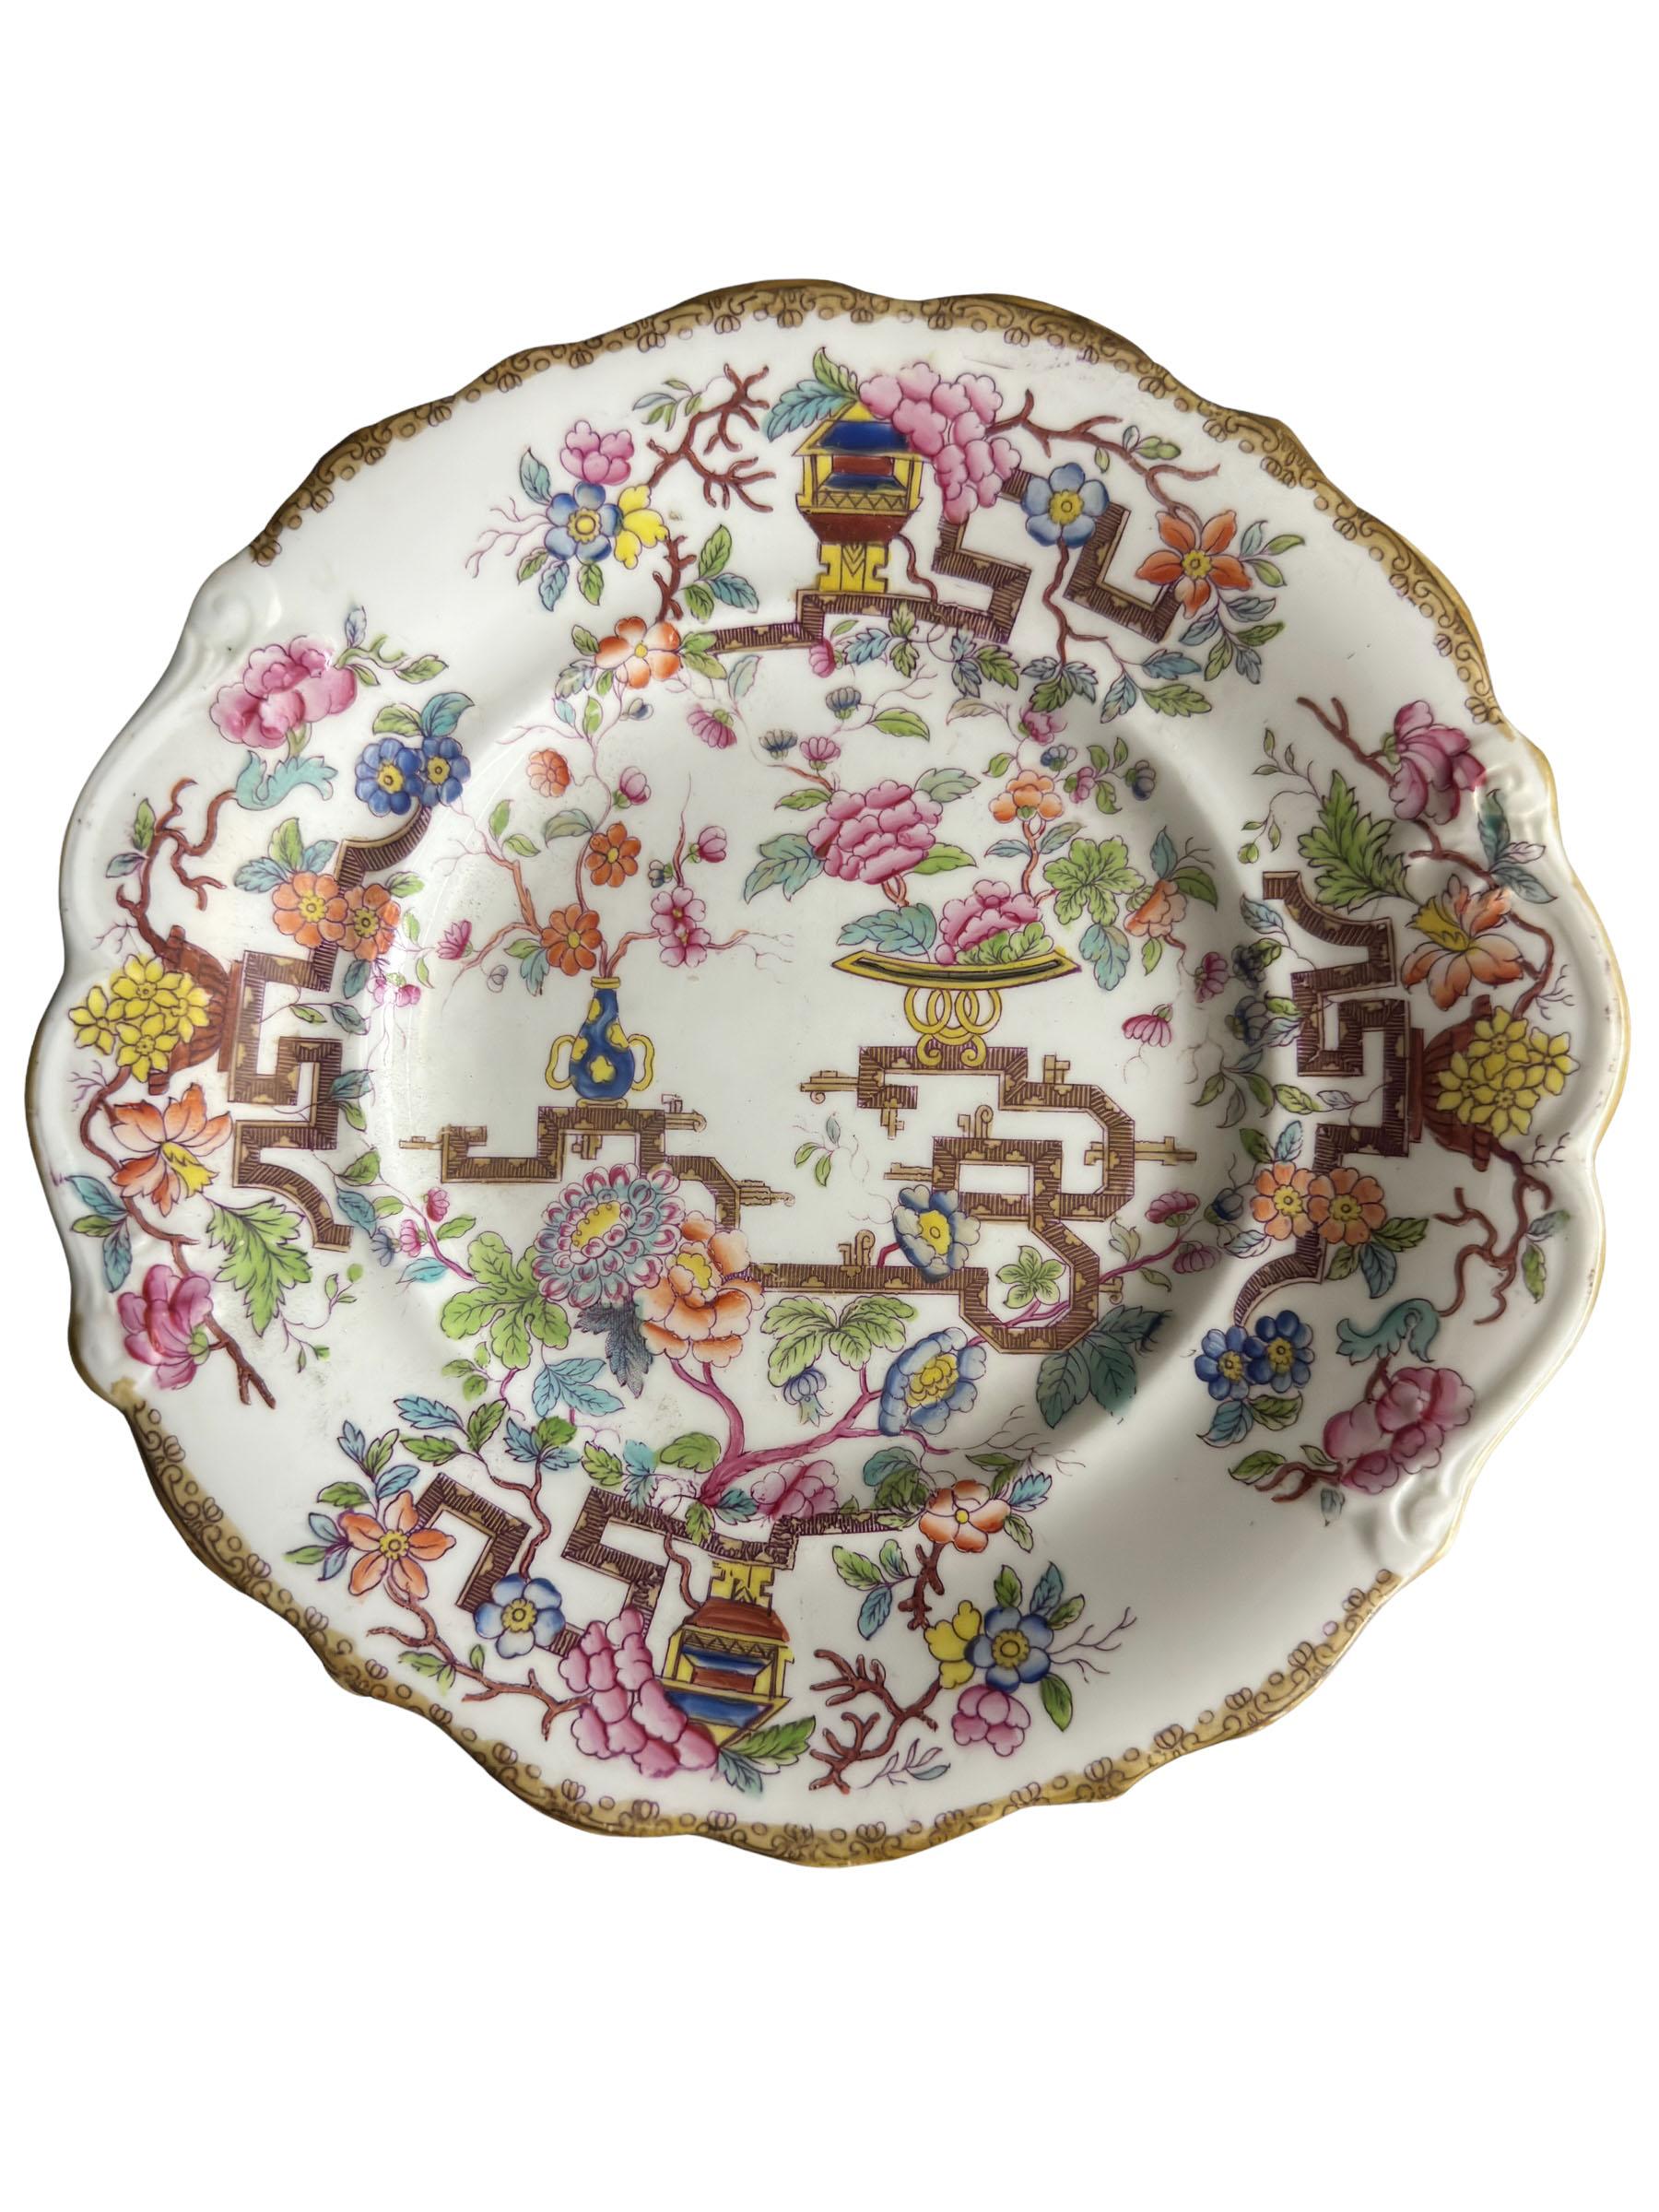 An early antique Minton Chinese Tree chinoiserie plate with gilt scalloped edge. Chinese tree with vases of peonies and blossoms hand painted. Circa 1870s, England. Unsigned.
